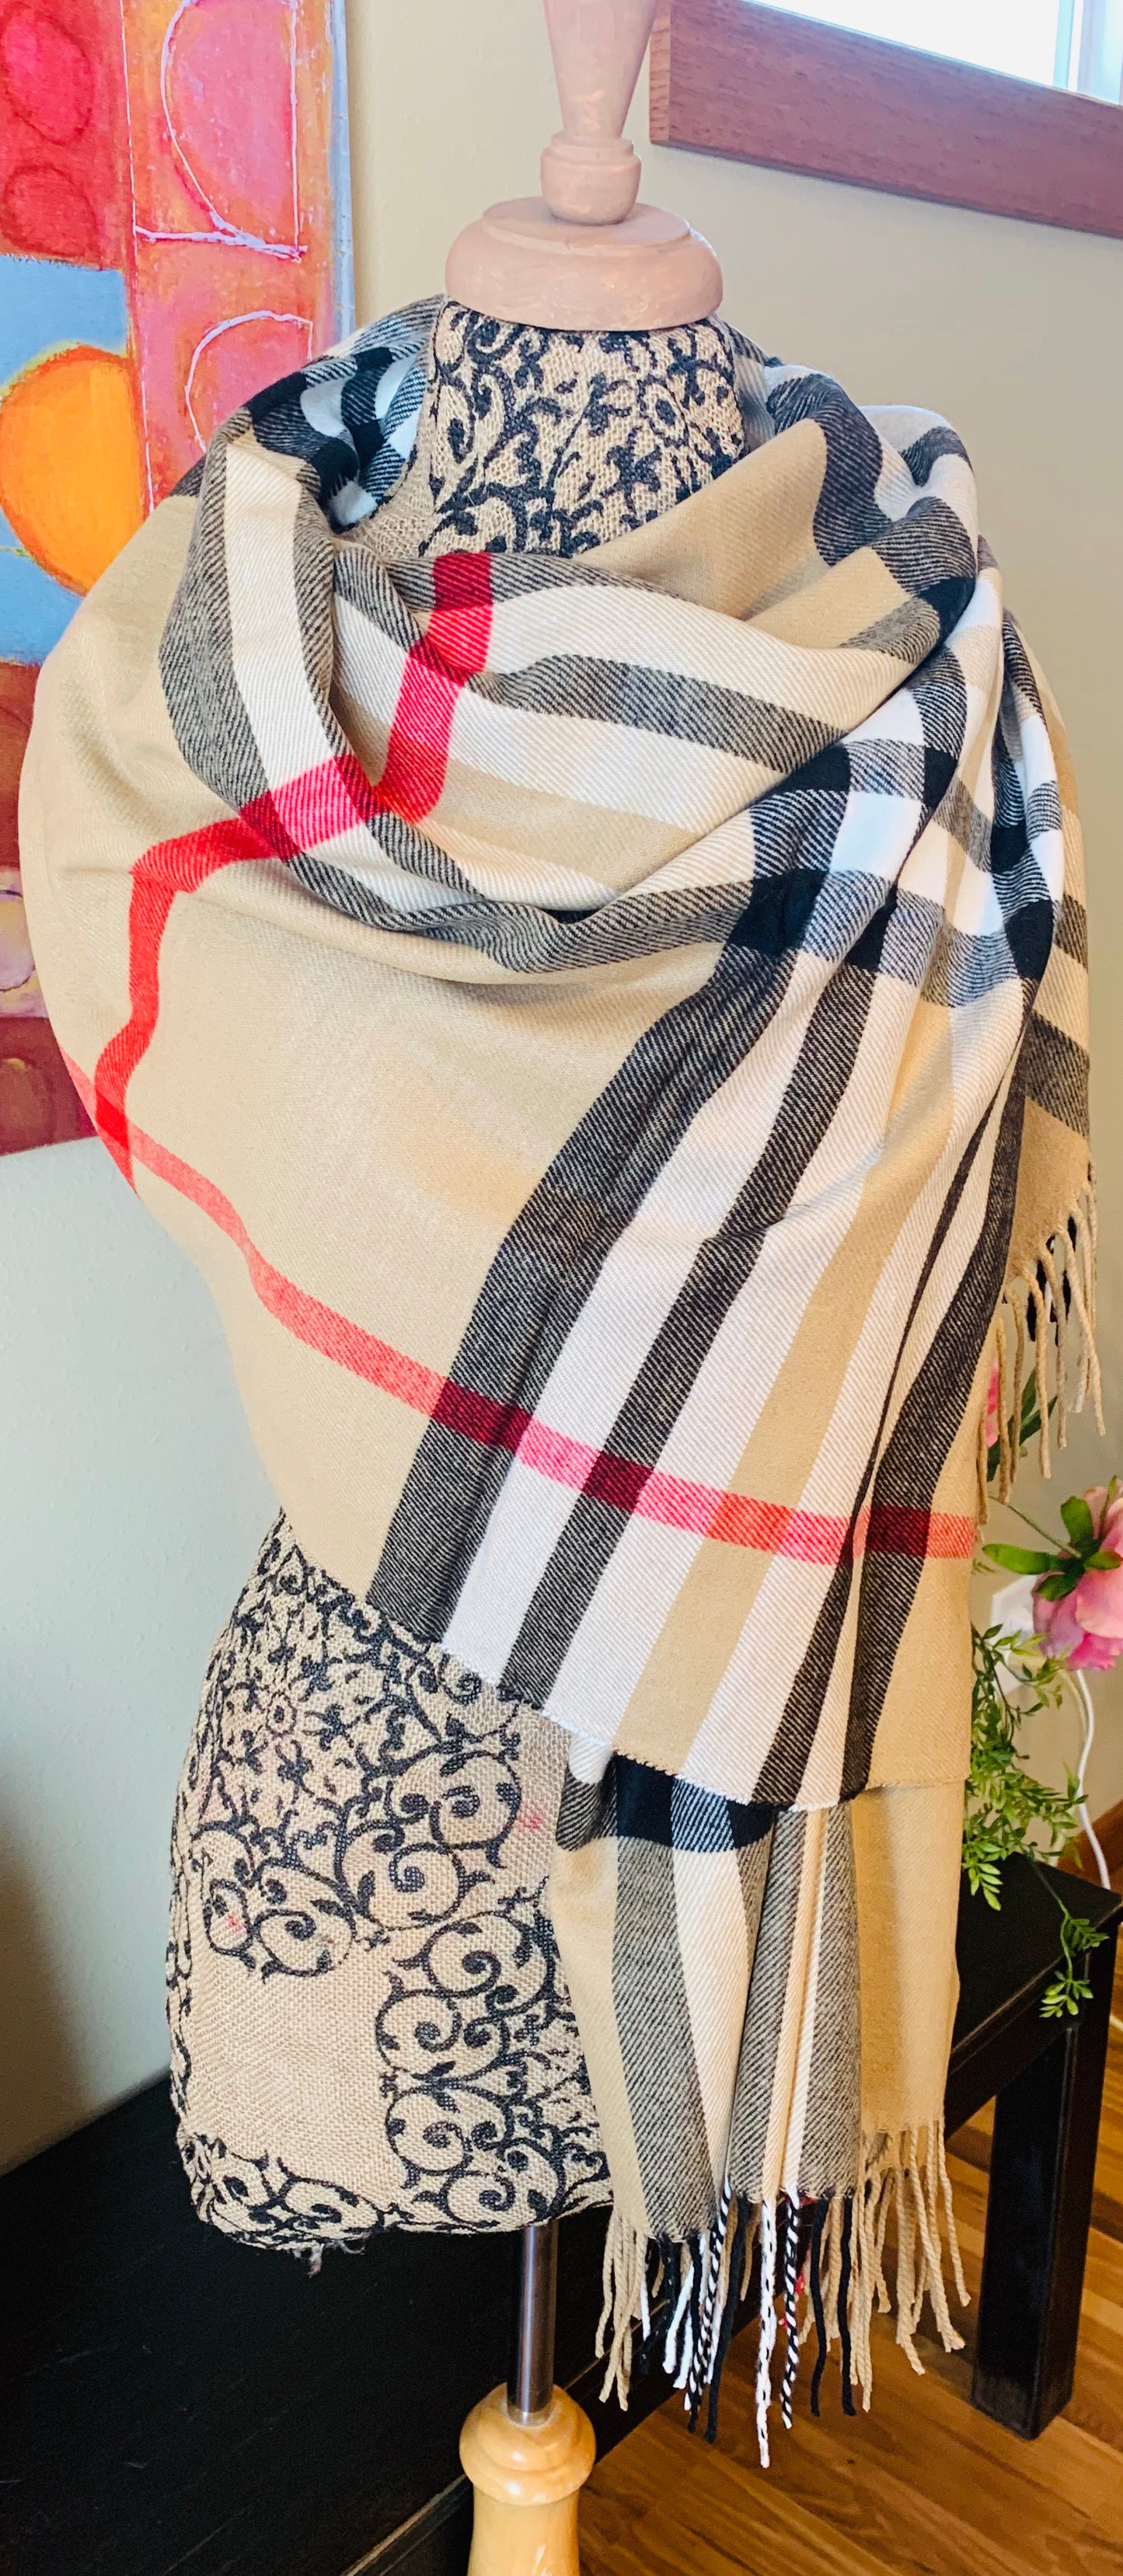 Cashmere Scotland Scarf | 80 x 30 | Camel brown vintage check plaid | Beautiful as a wrap/shawl - Stacy's Pink Martini Boutique